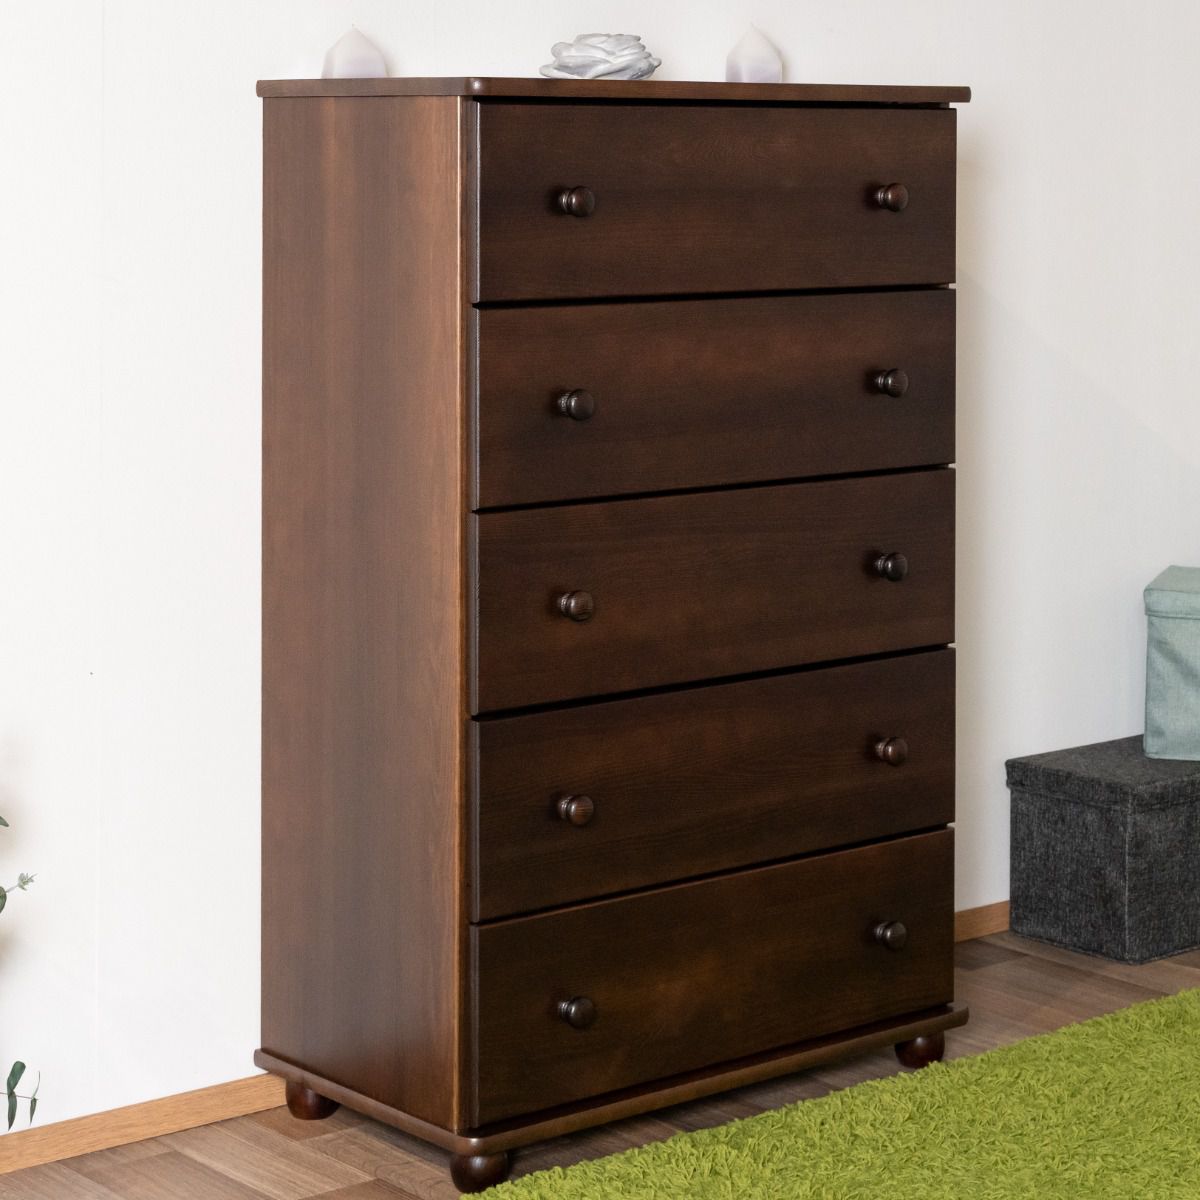 Narrow chest of drawers solid pine walnut Junco 140, with five large drawers, very stable 123 x 80 x 42 cm, lots of storage space